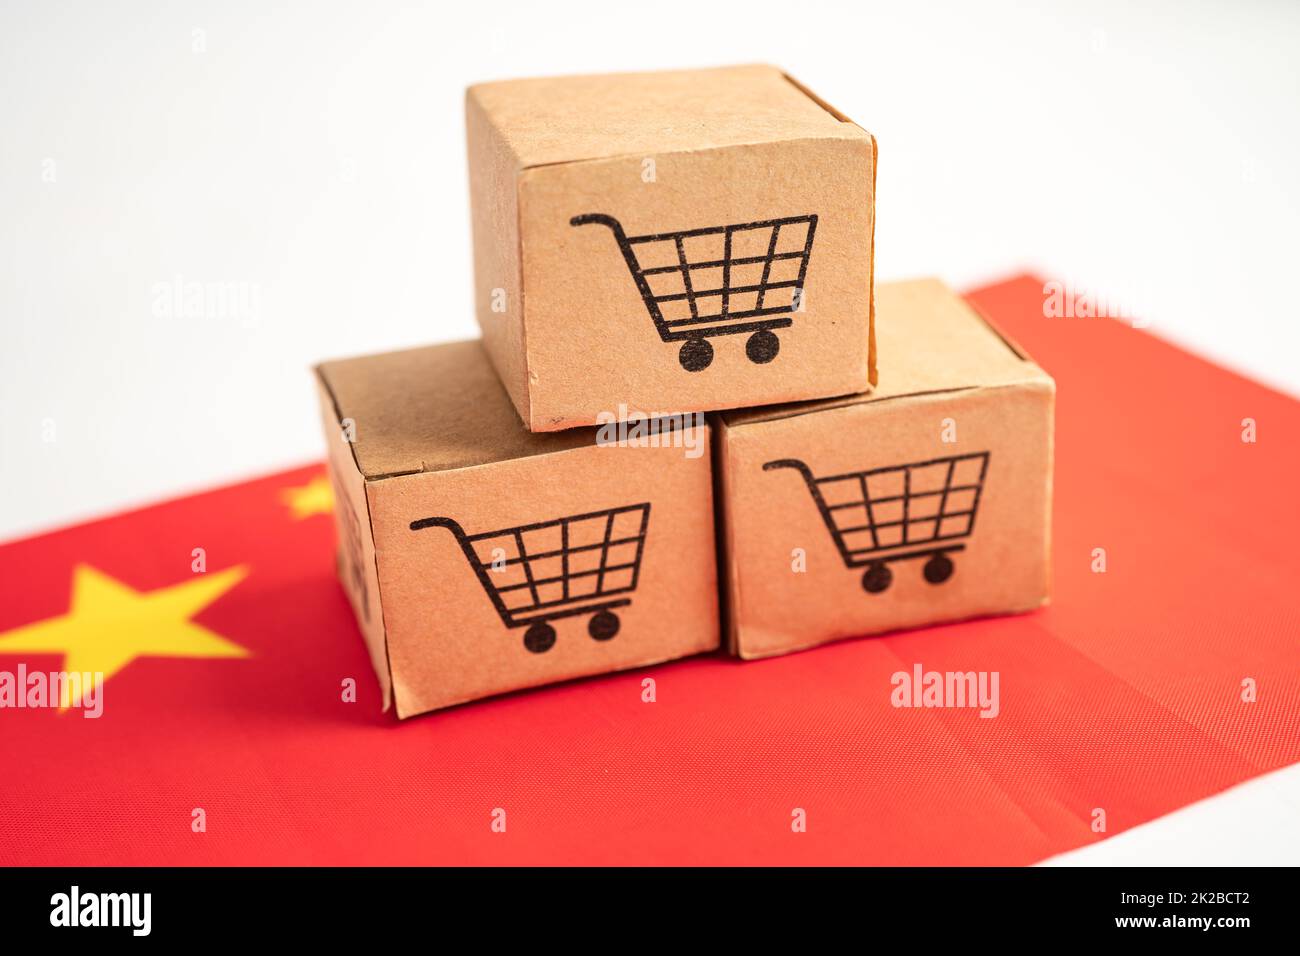 Box with shopping cart logo and China flag, Import Export Shopping online or eCommerce finance delivery service store product shipping, trade, supplier concept. Stock Photo